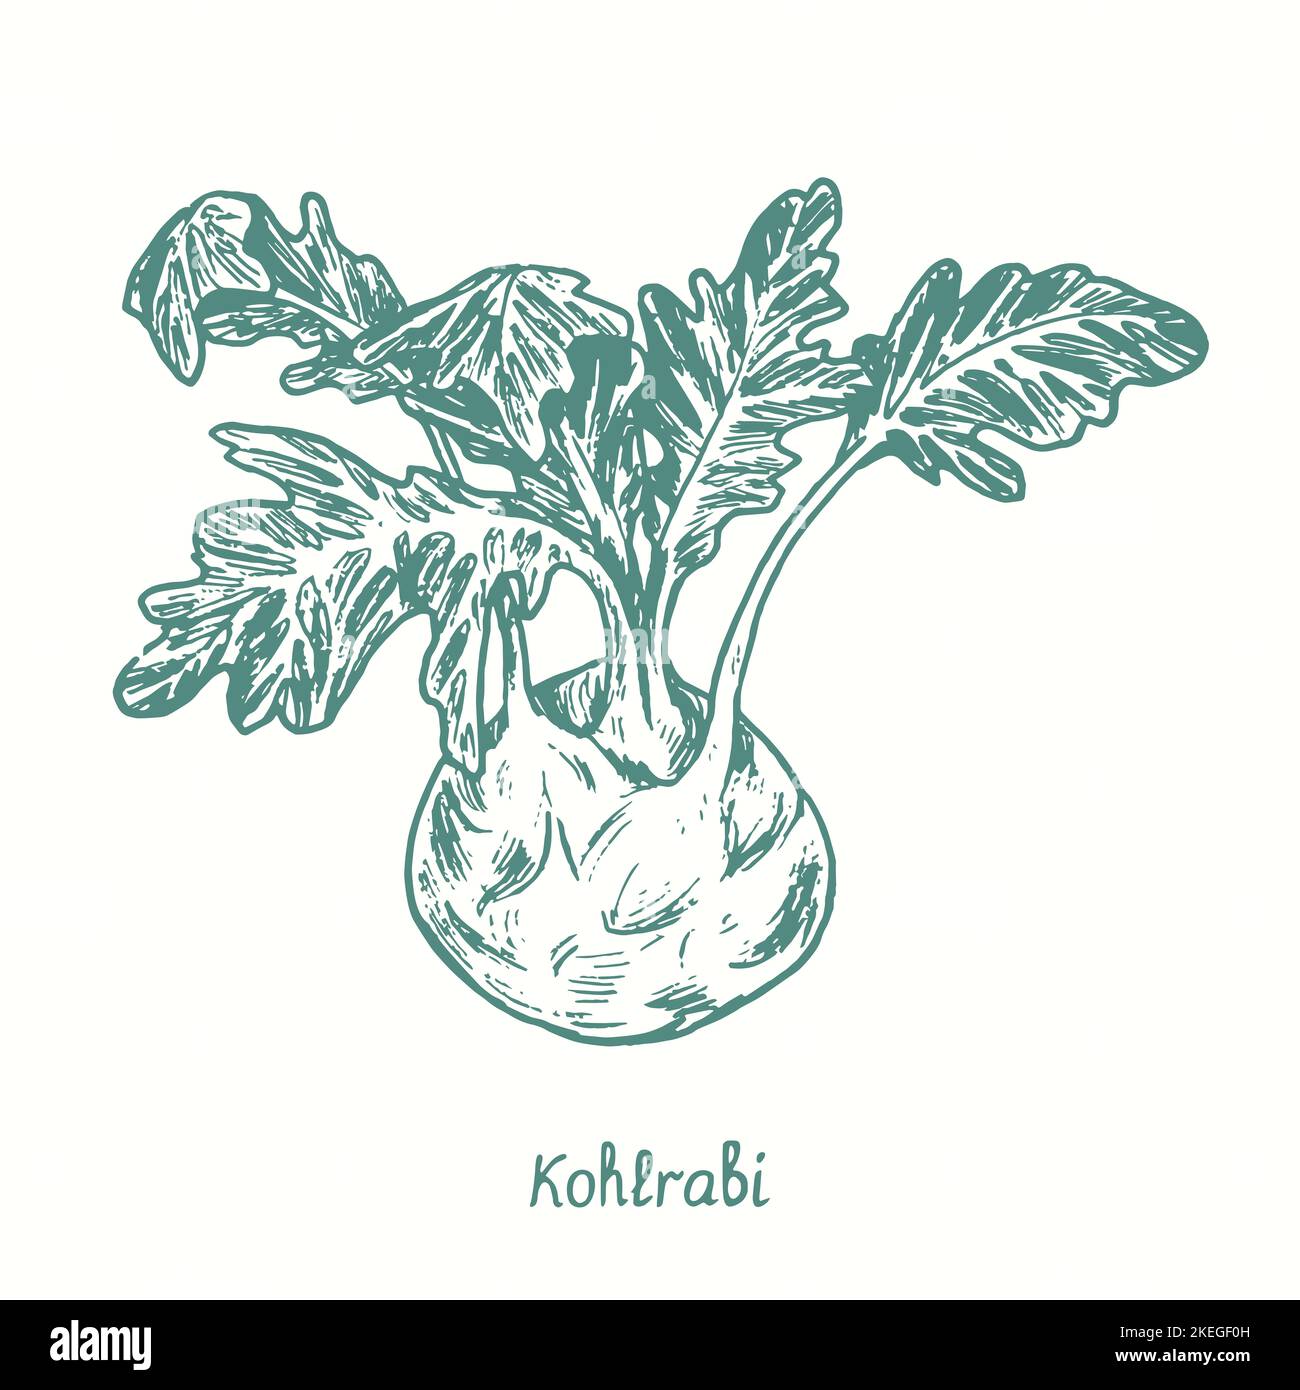 Kohlrabi.  Ink black and white doodle drawing in woodcut style Stock Photo